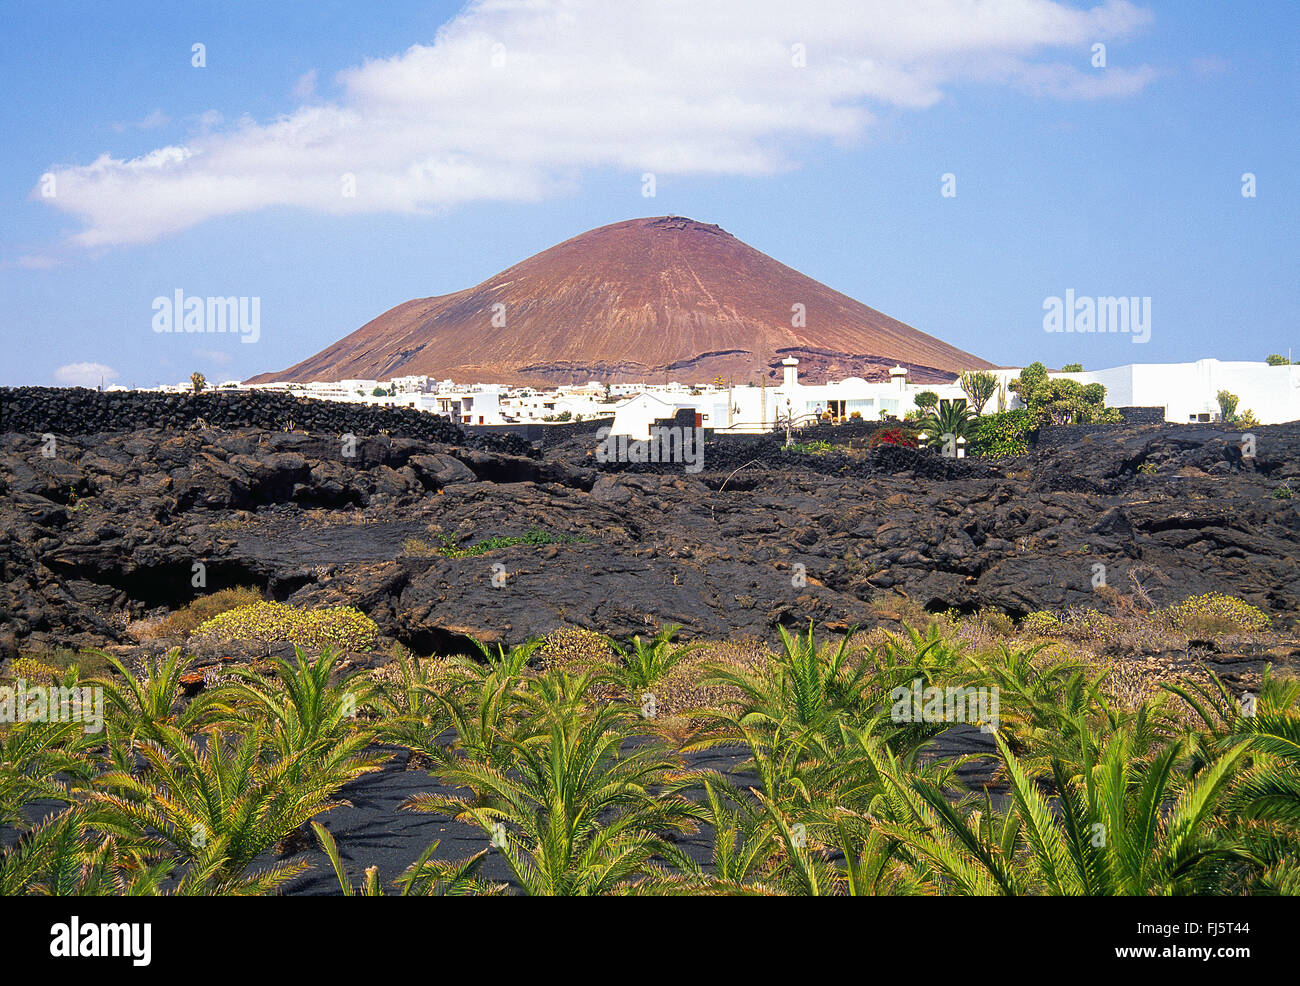 Lava and overview of the village. Tahiche, Lanzarote island, Canary Islands, Spain. Stock Photo